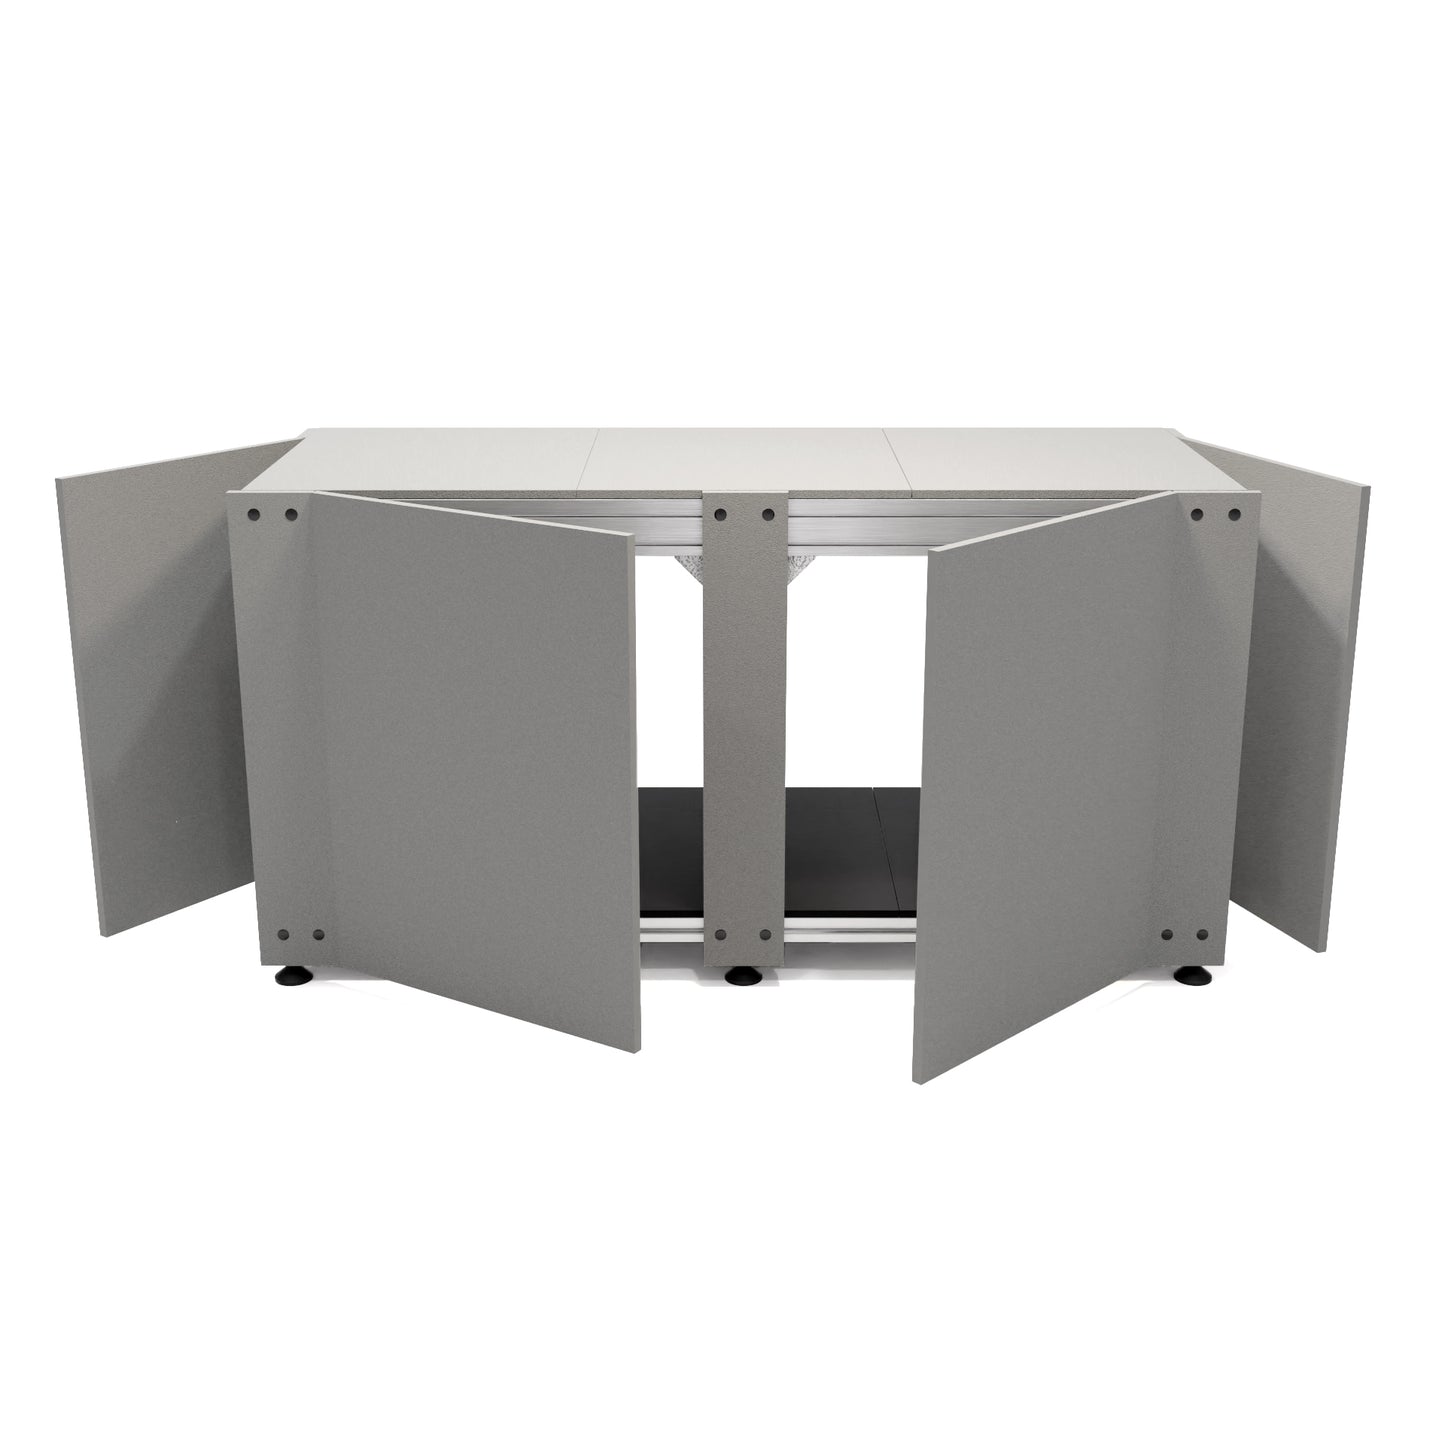 ReefPoint® 190 Saltwater Acrylic Aquarium and Aluminum Stand Center OF 60x24x30